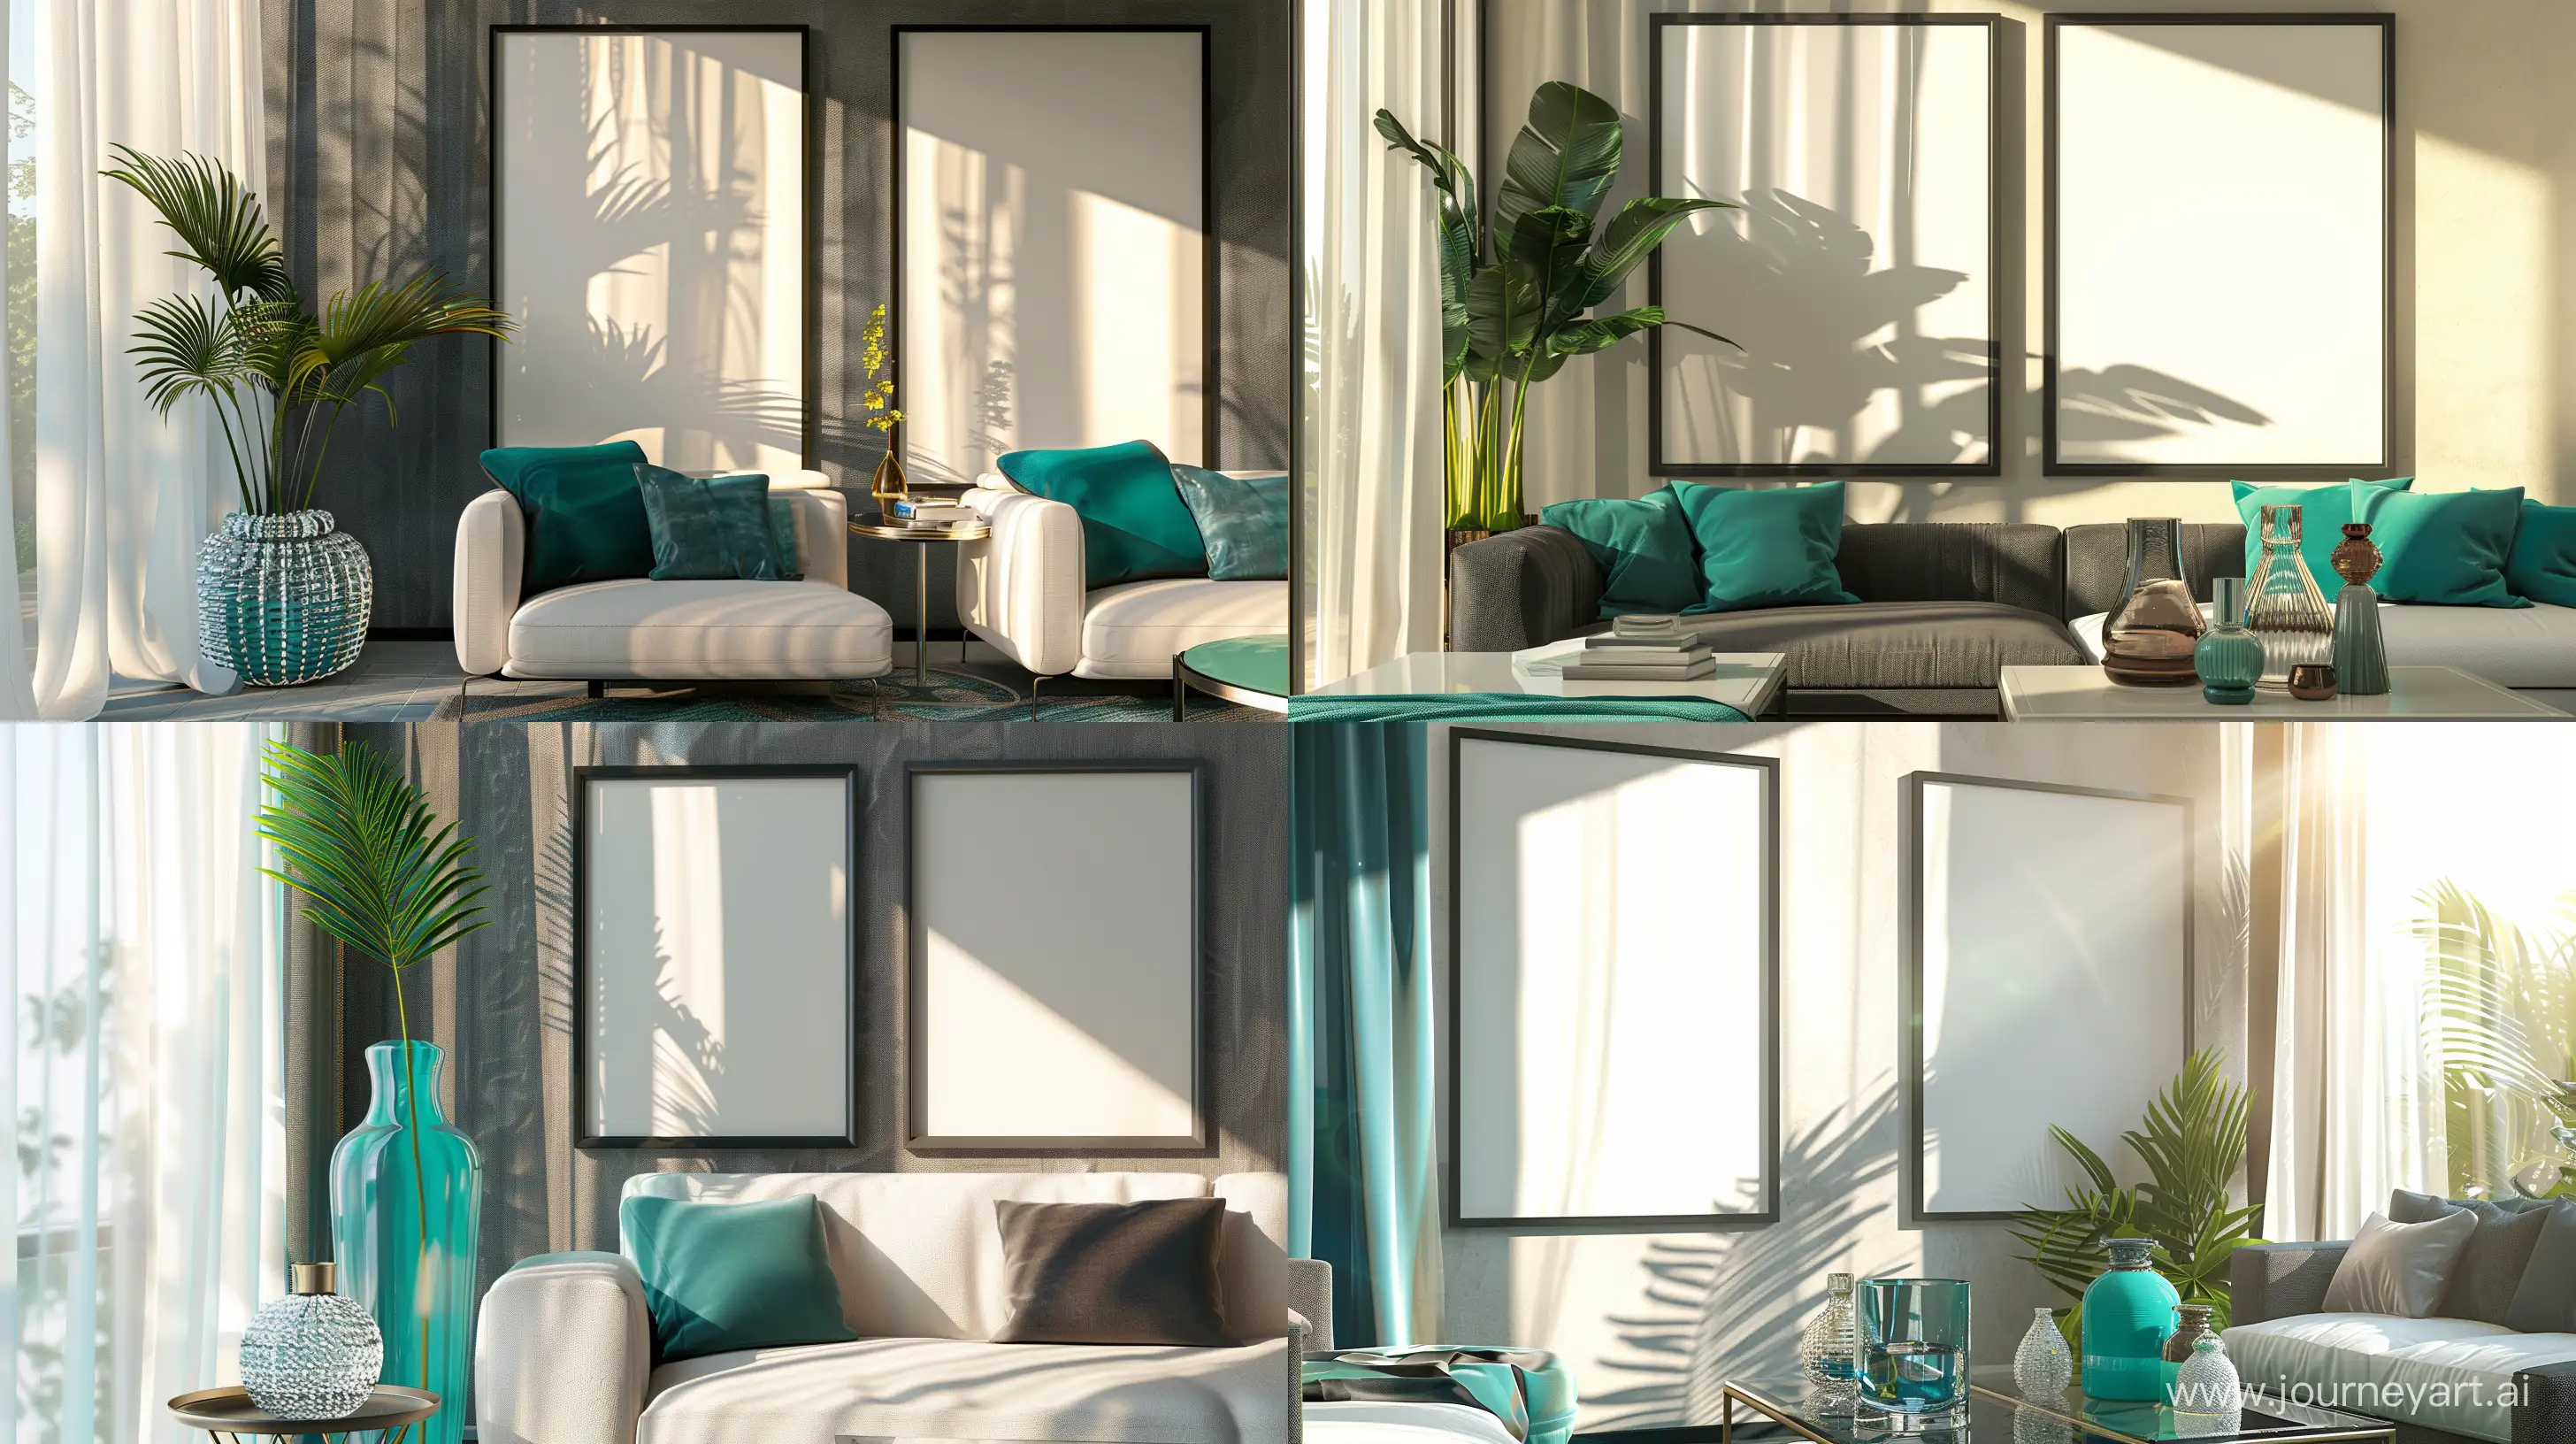 Capture the Essence: Two blank picture frame mockups adorn the walls of a modern living room, where sleek furniture in shades of charcoal and ivory harmonize with pops of vibrant teal. Sunlight filters through sheer curtains, casting a warm glow on the tropical plant and glistening vases. --ar 16:9